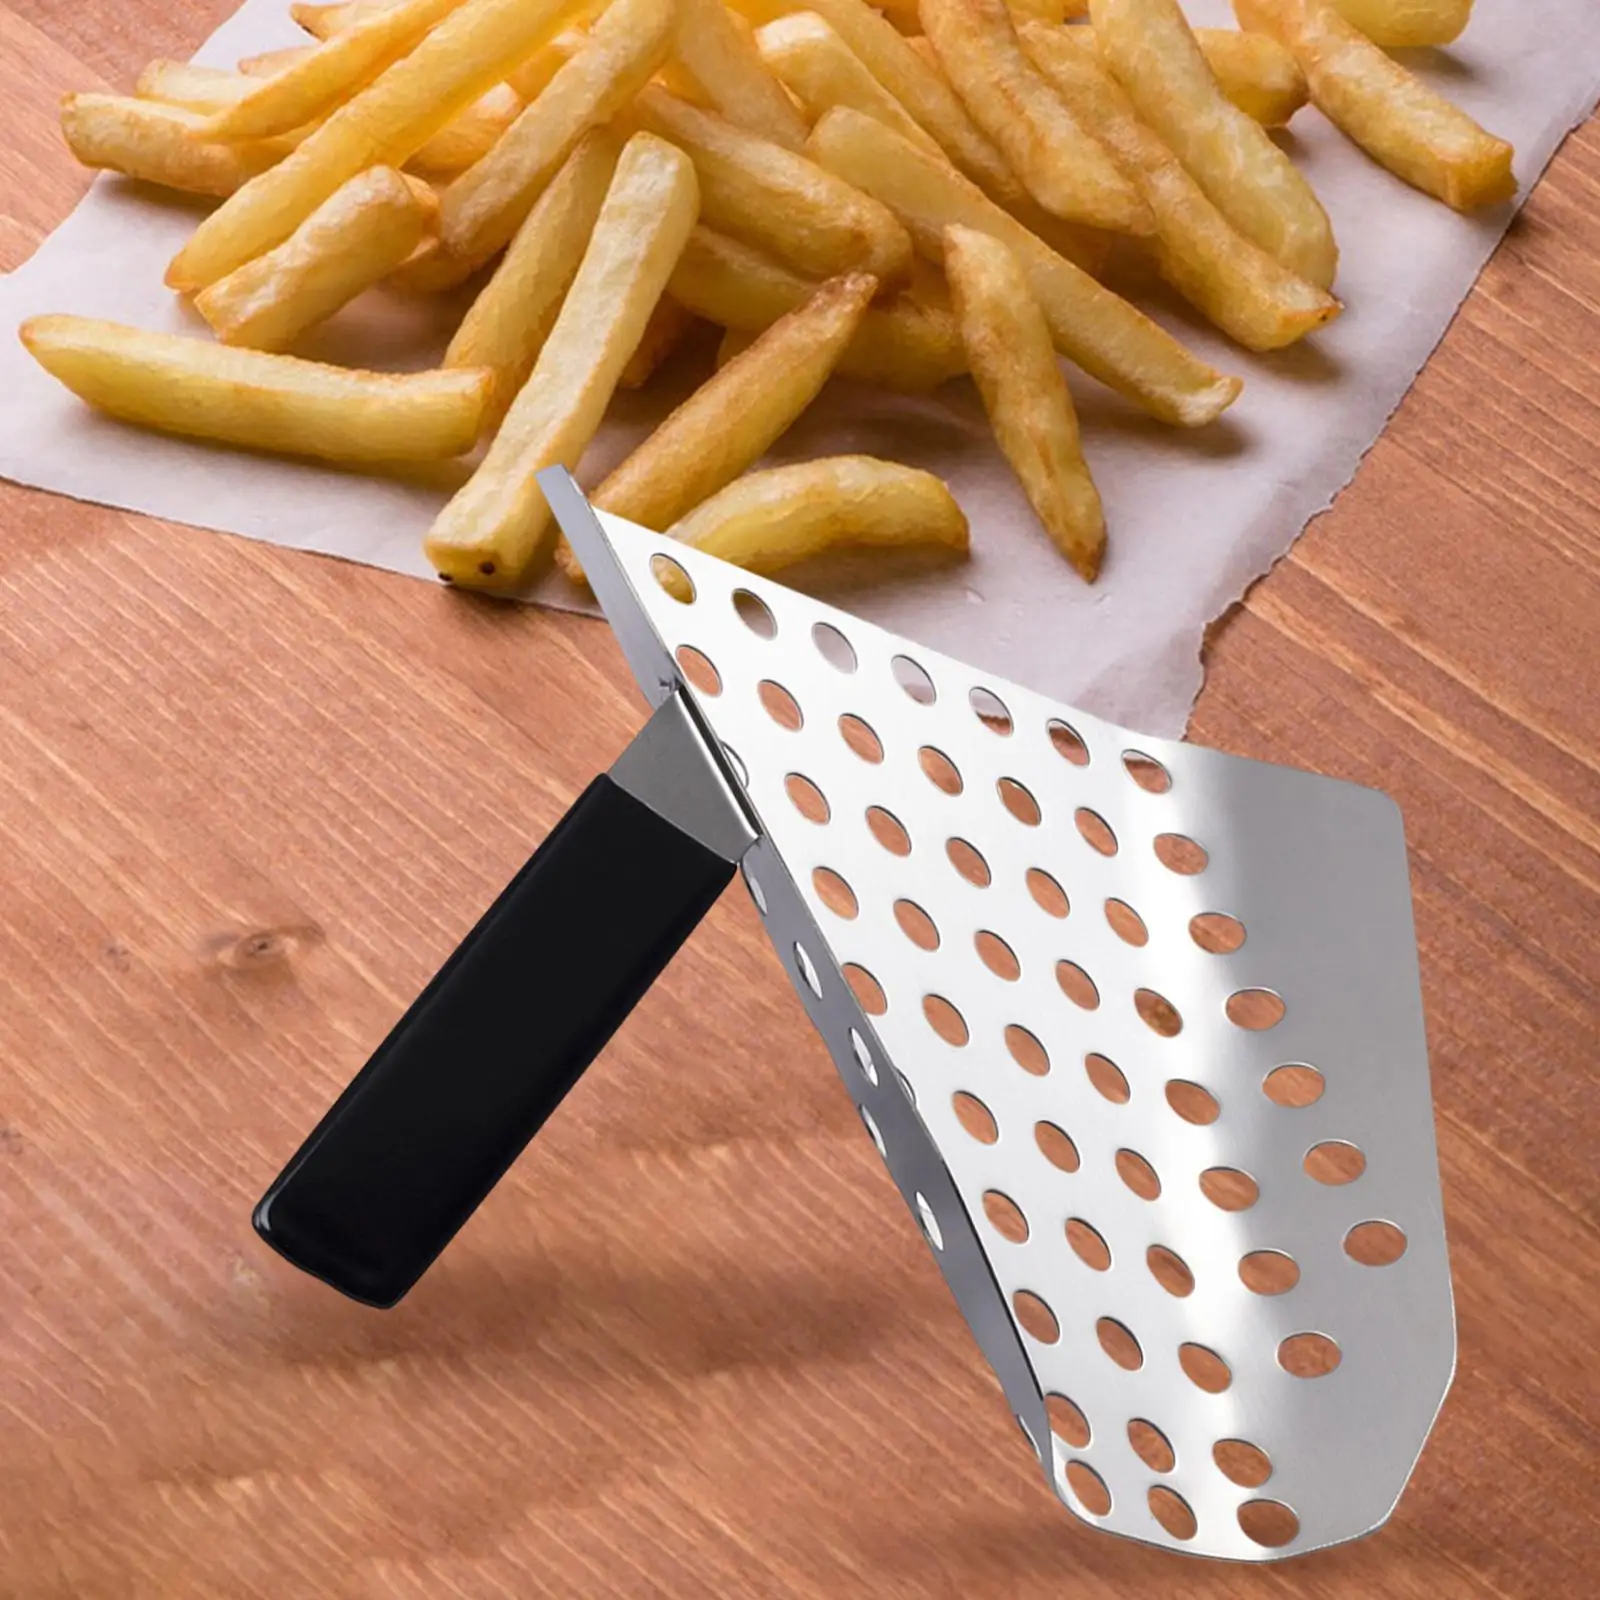 Portable French Fries Packaging Tools Multifunctional Quick Tool Washable for Food Restaurant Shop French Fry Nuts Popcorn